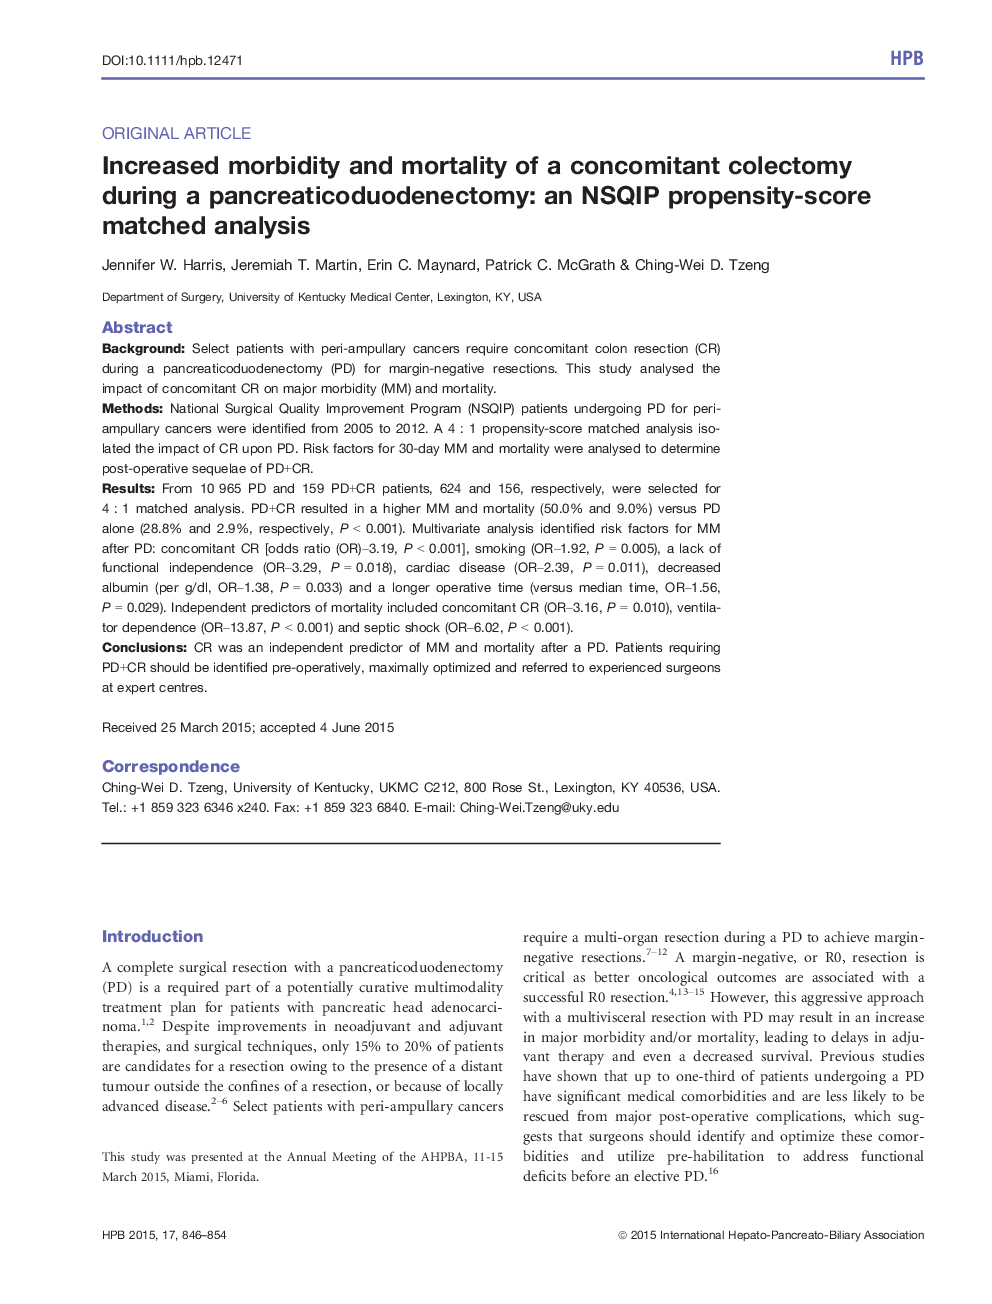 Increased morbidity and mortality of a concomitant colectomy during a pancreaticoduodenectomy: an NSQIP propensity-score matched analysis